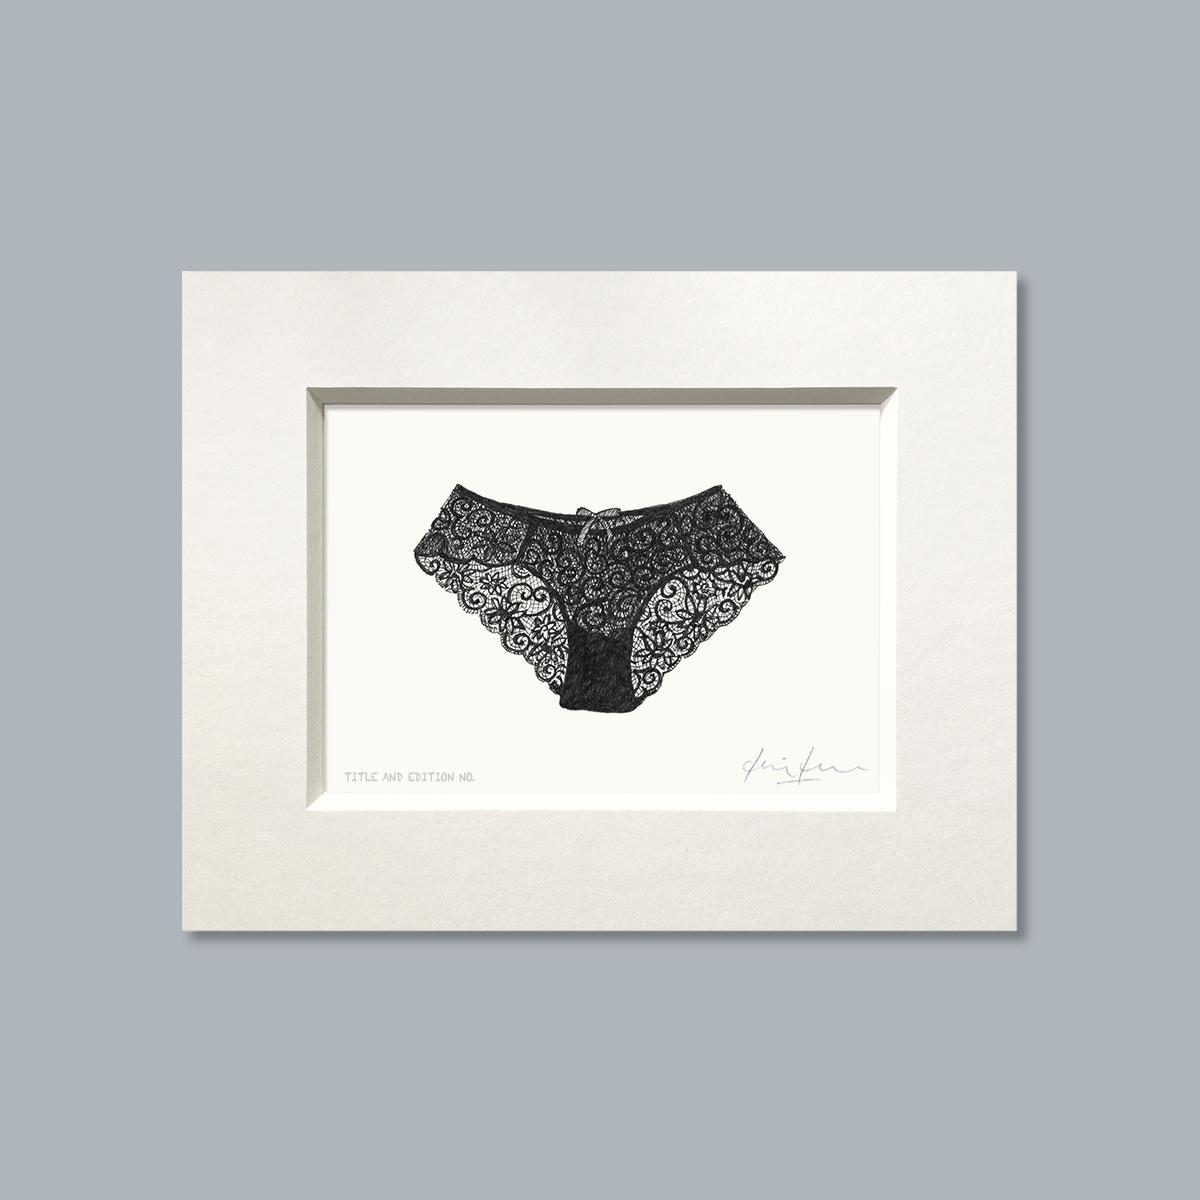 Limited edition print from pen and ink drawing of a pair of lacy knickers in a white mount